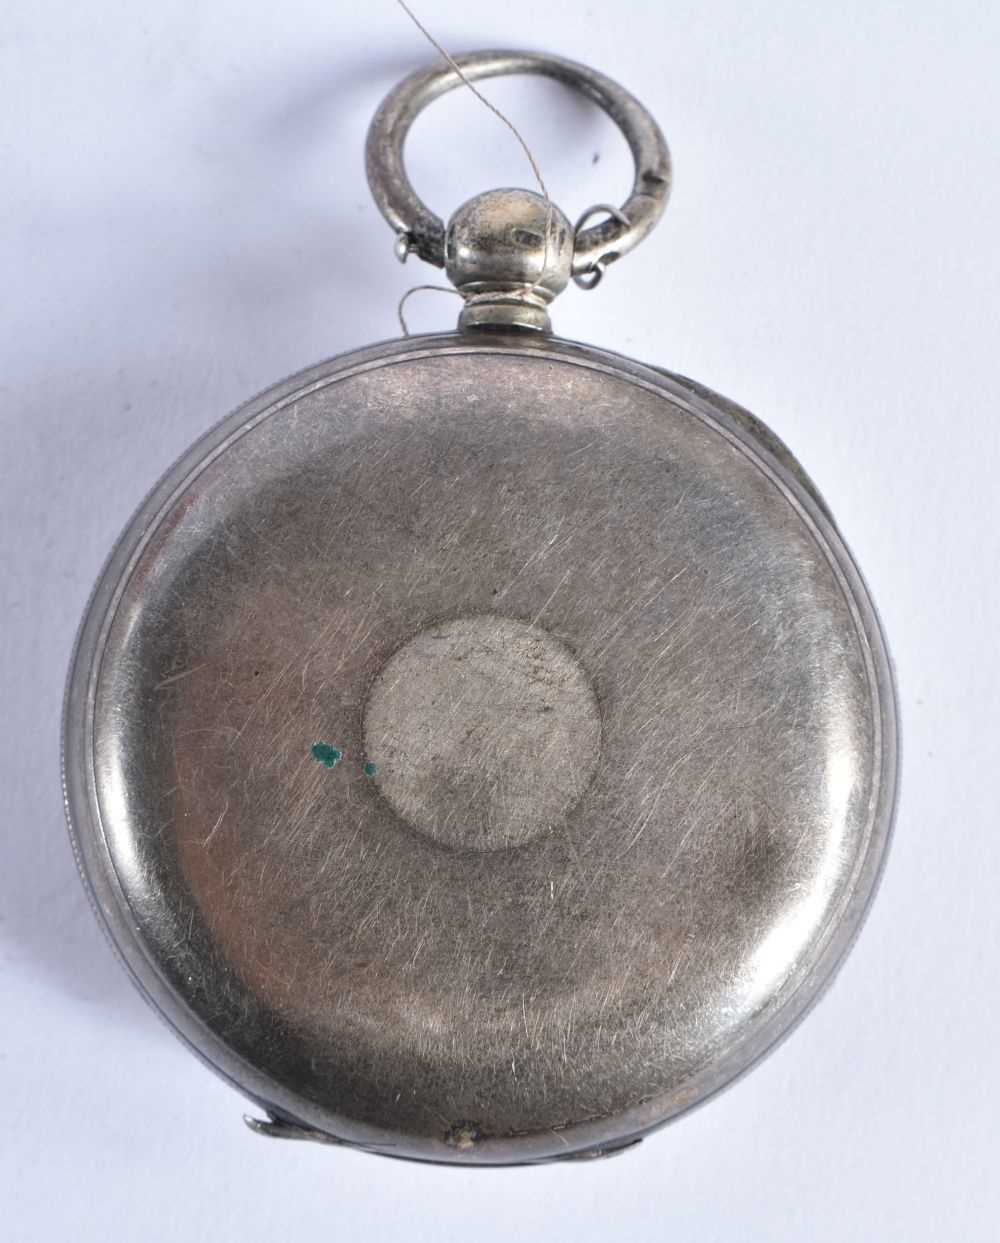 WALTHAM Sterling Silver Gents Antique Open Face Pocket Watch Key-wind Working. 142 grams. London - Image 4 of 4